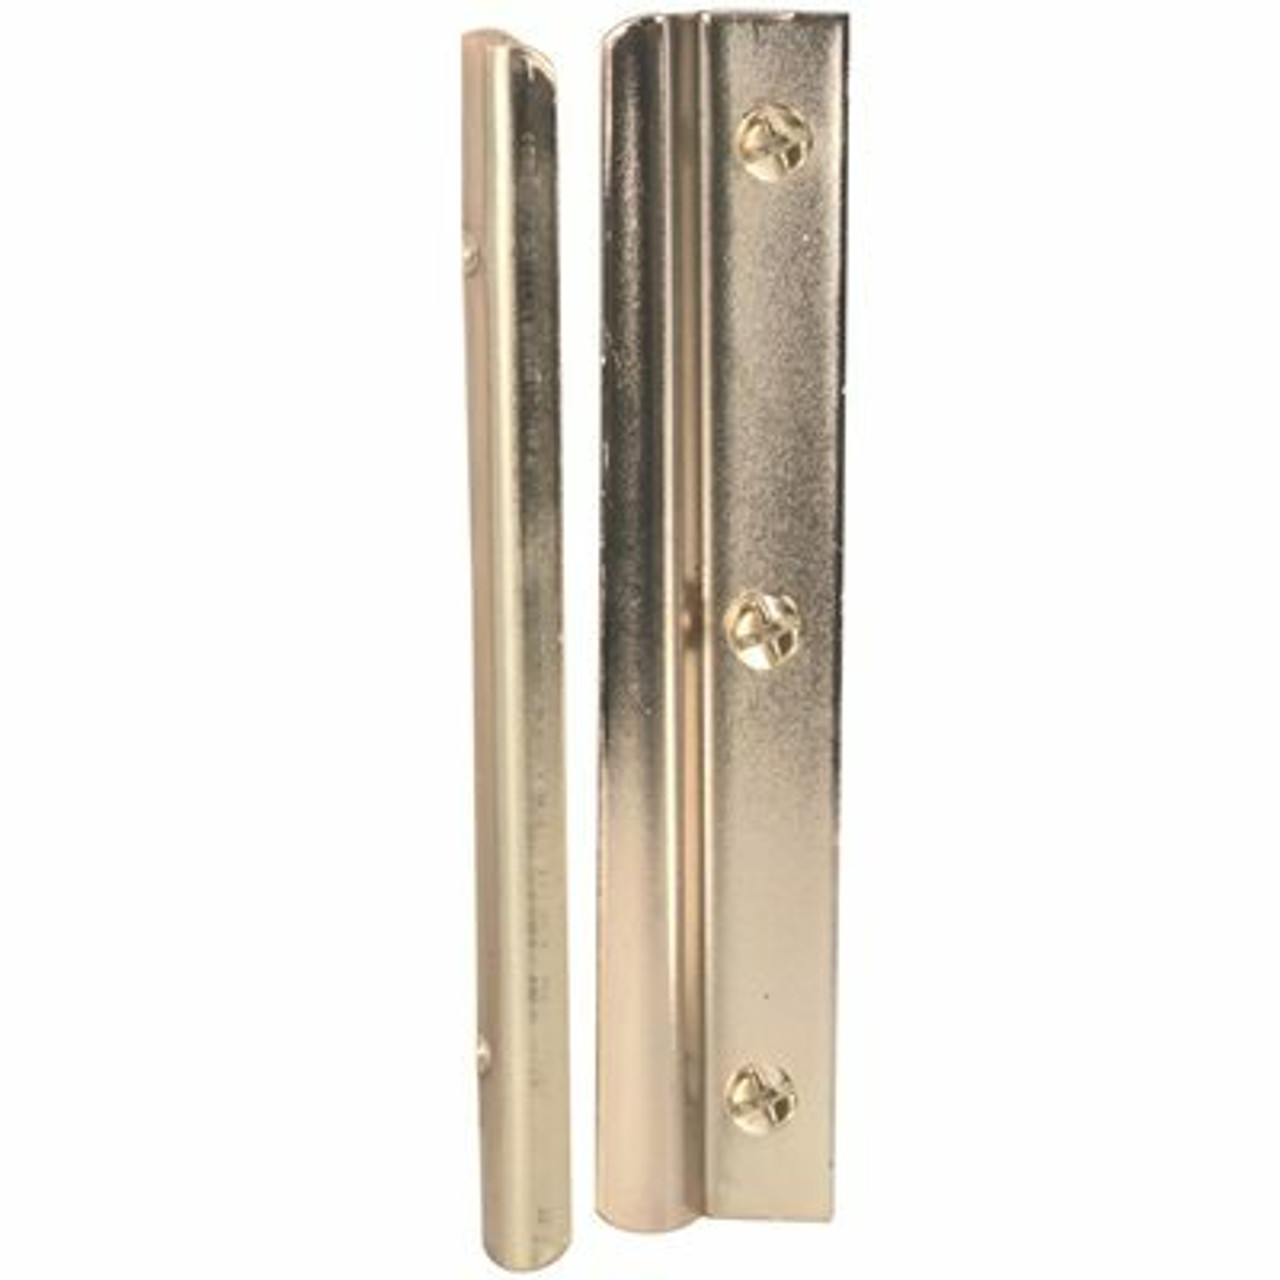 Don-Jo Mfg Inswing Door Latch Protector 6 In. Brass Plated